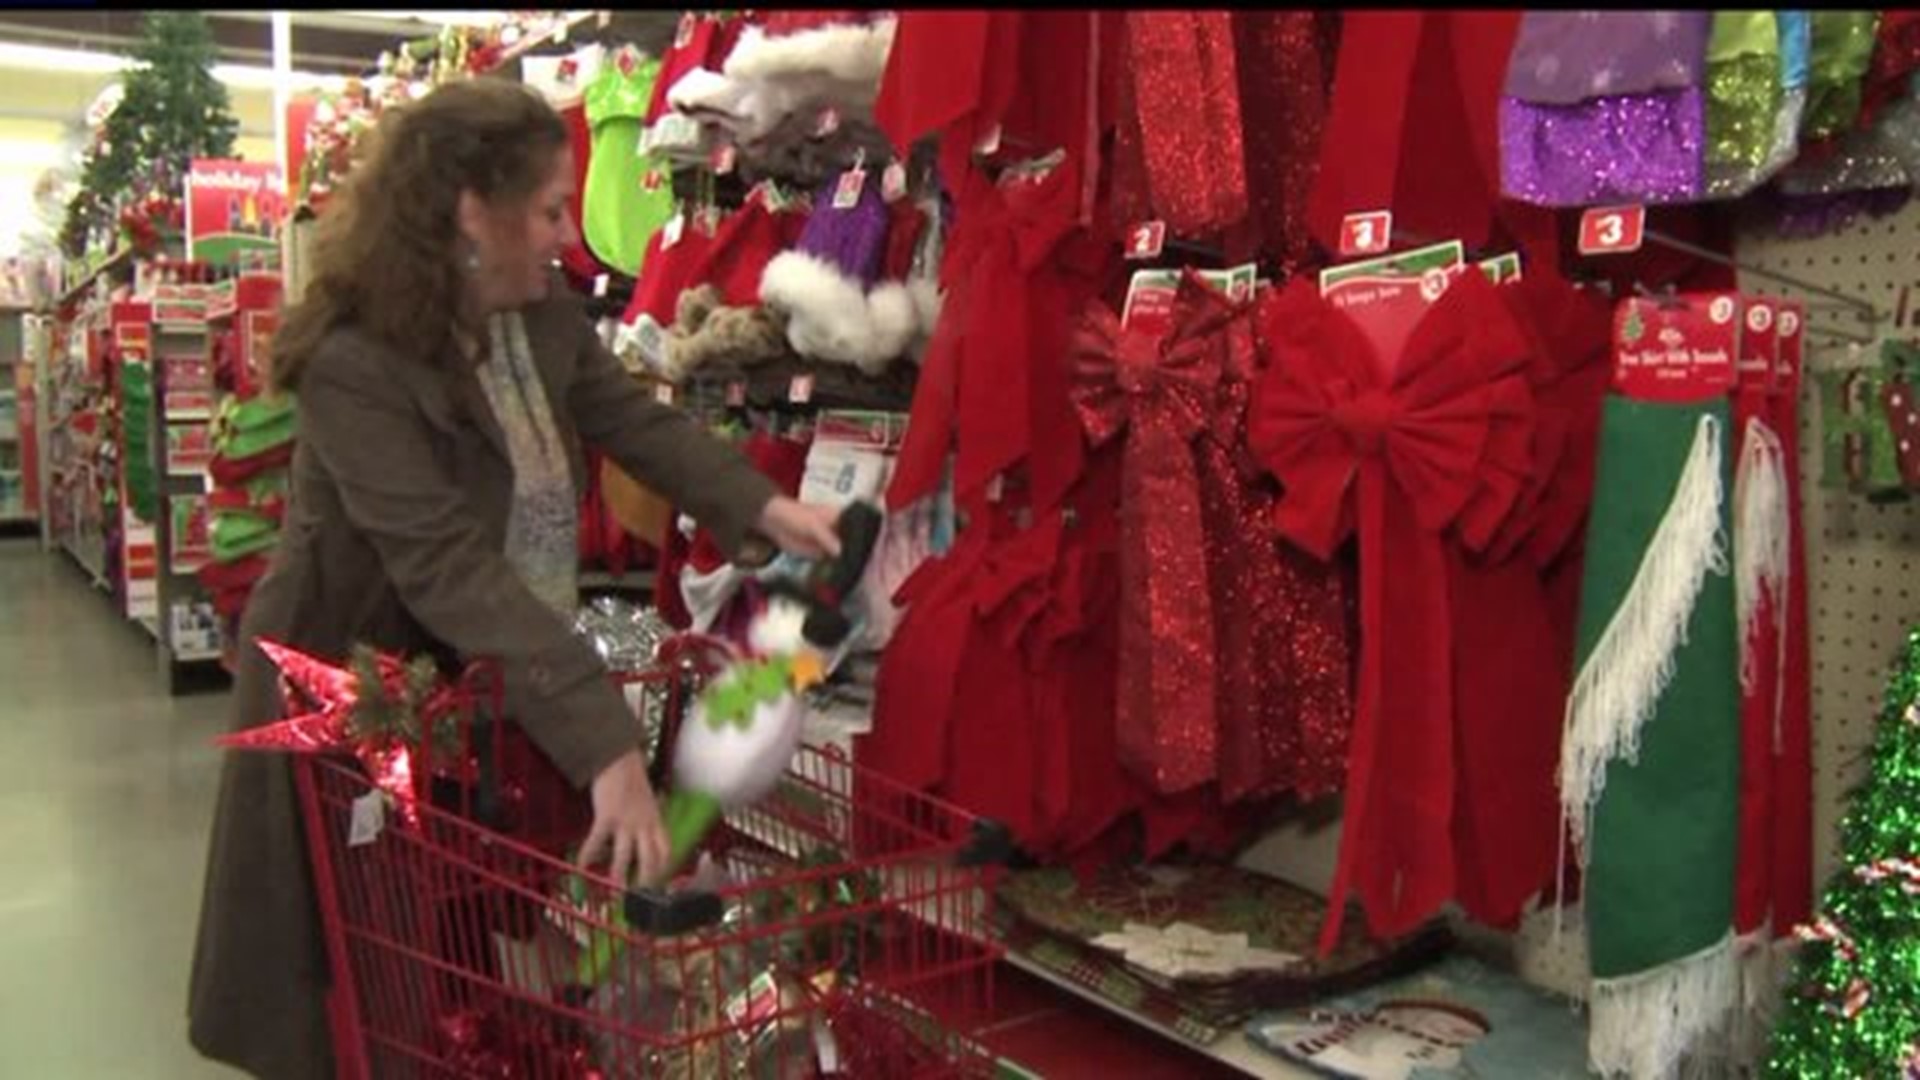 Fixing your Finances: Handling your finances for the holidays